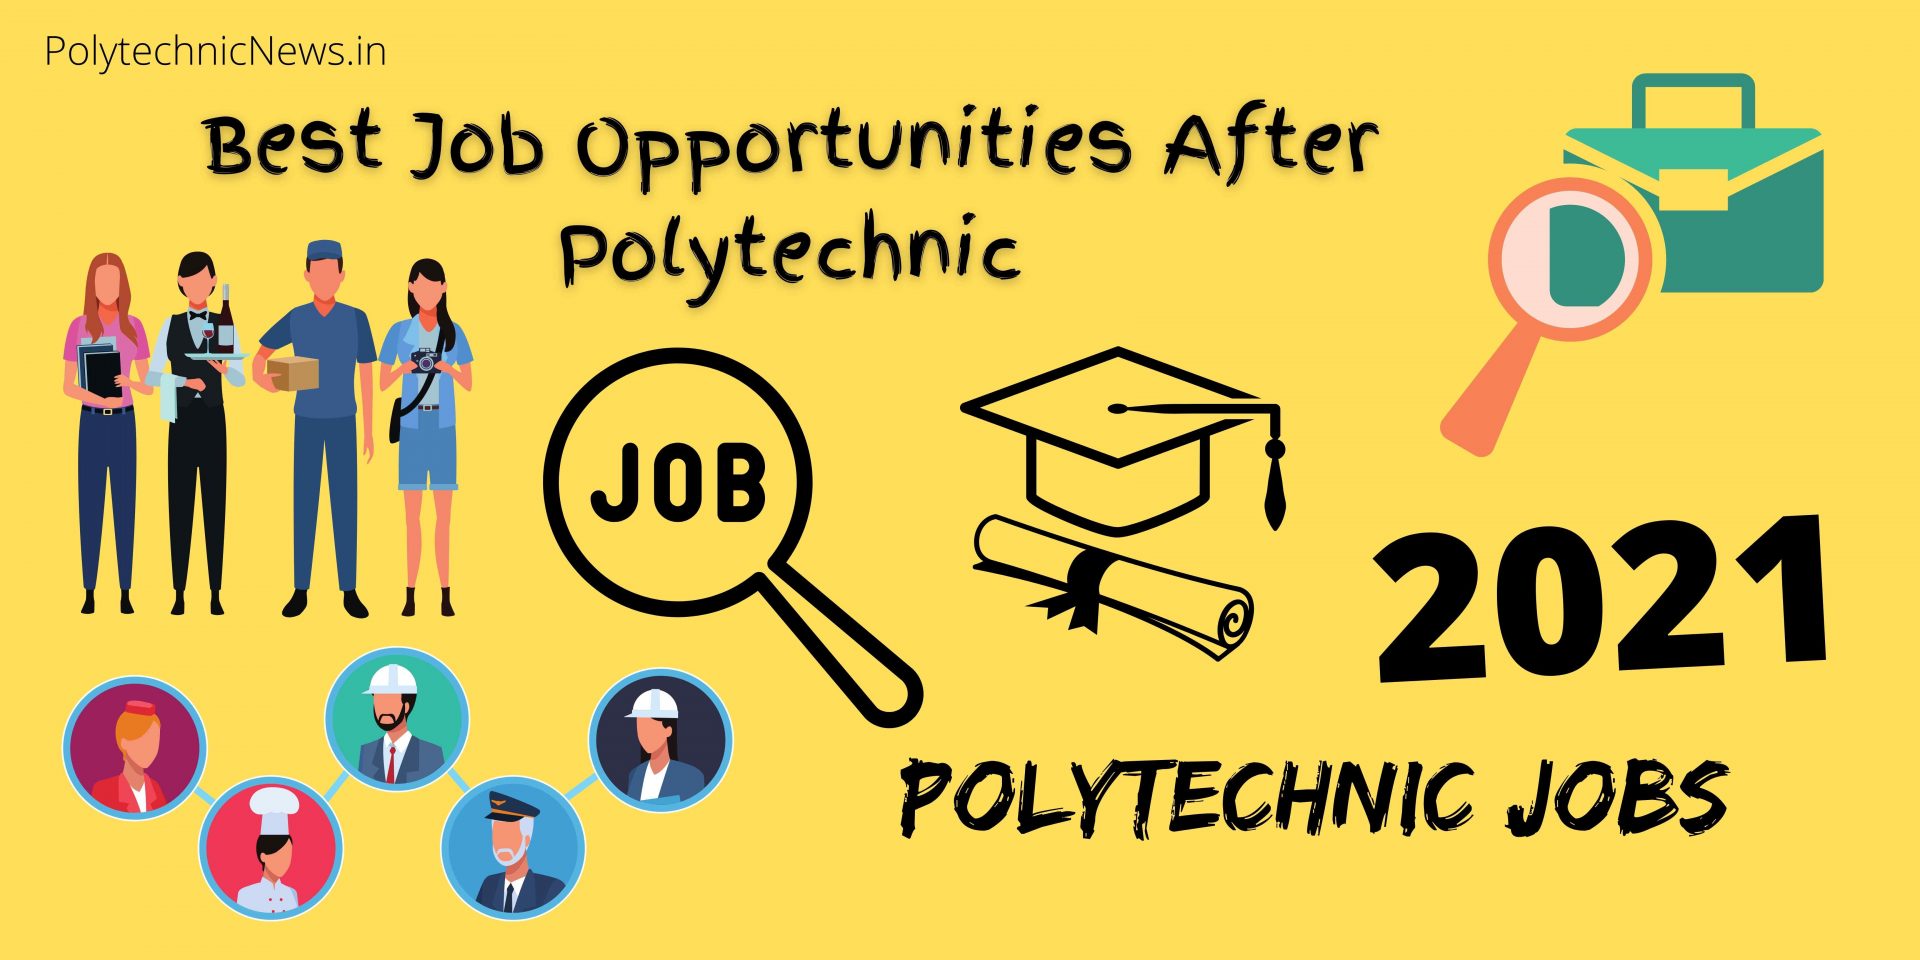 Job-Opportunities-After-Polytechnic